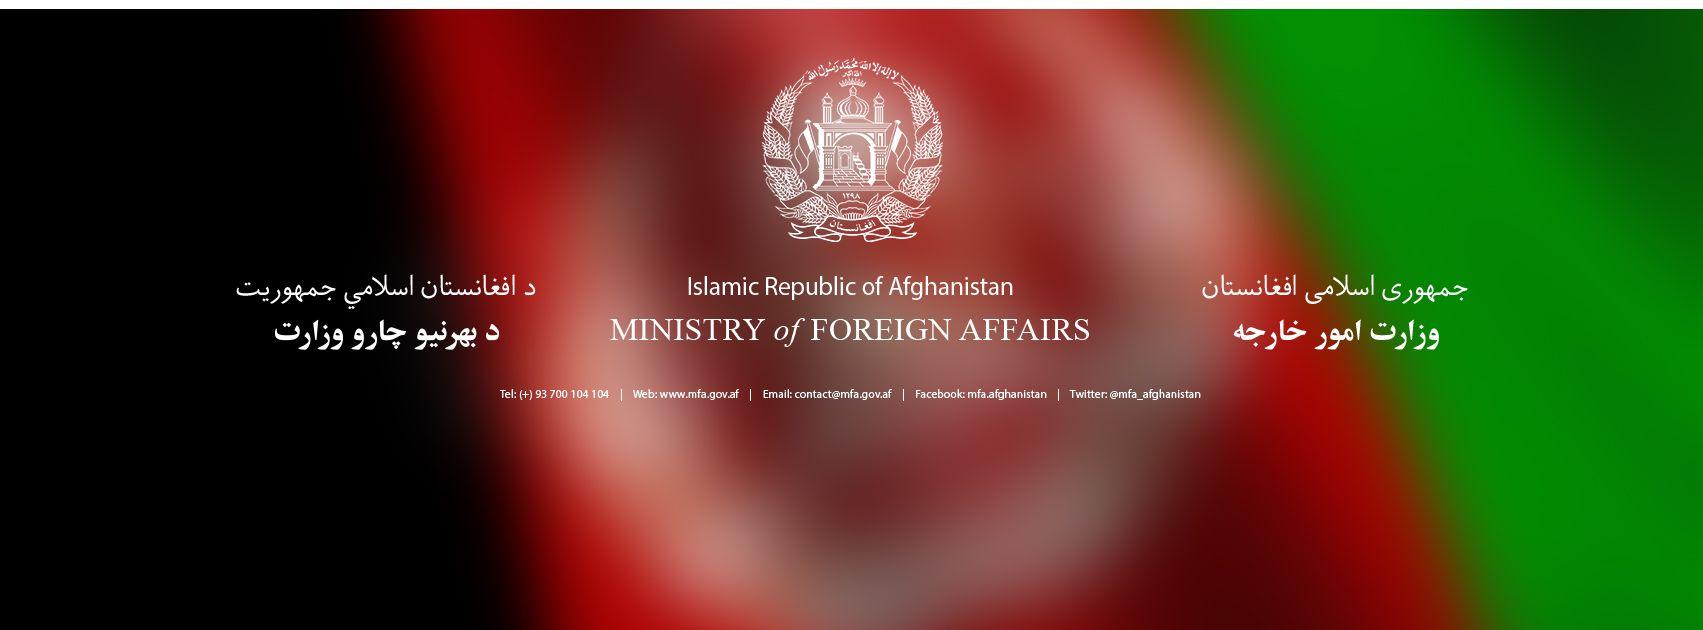 Red Foreign Language Logo - MoFA Staff Foreign Language Skills to Be Assessed. Independent